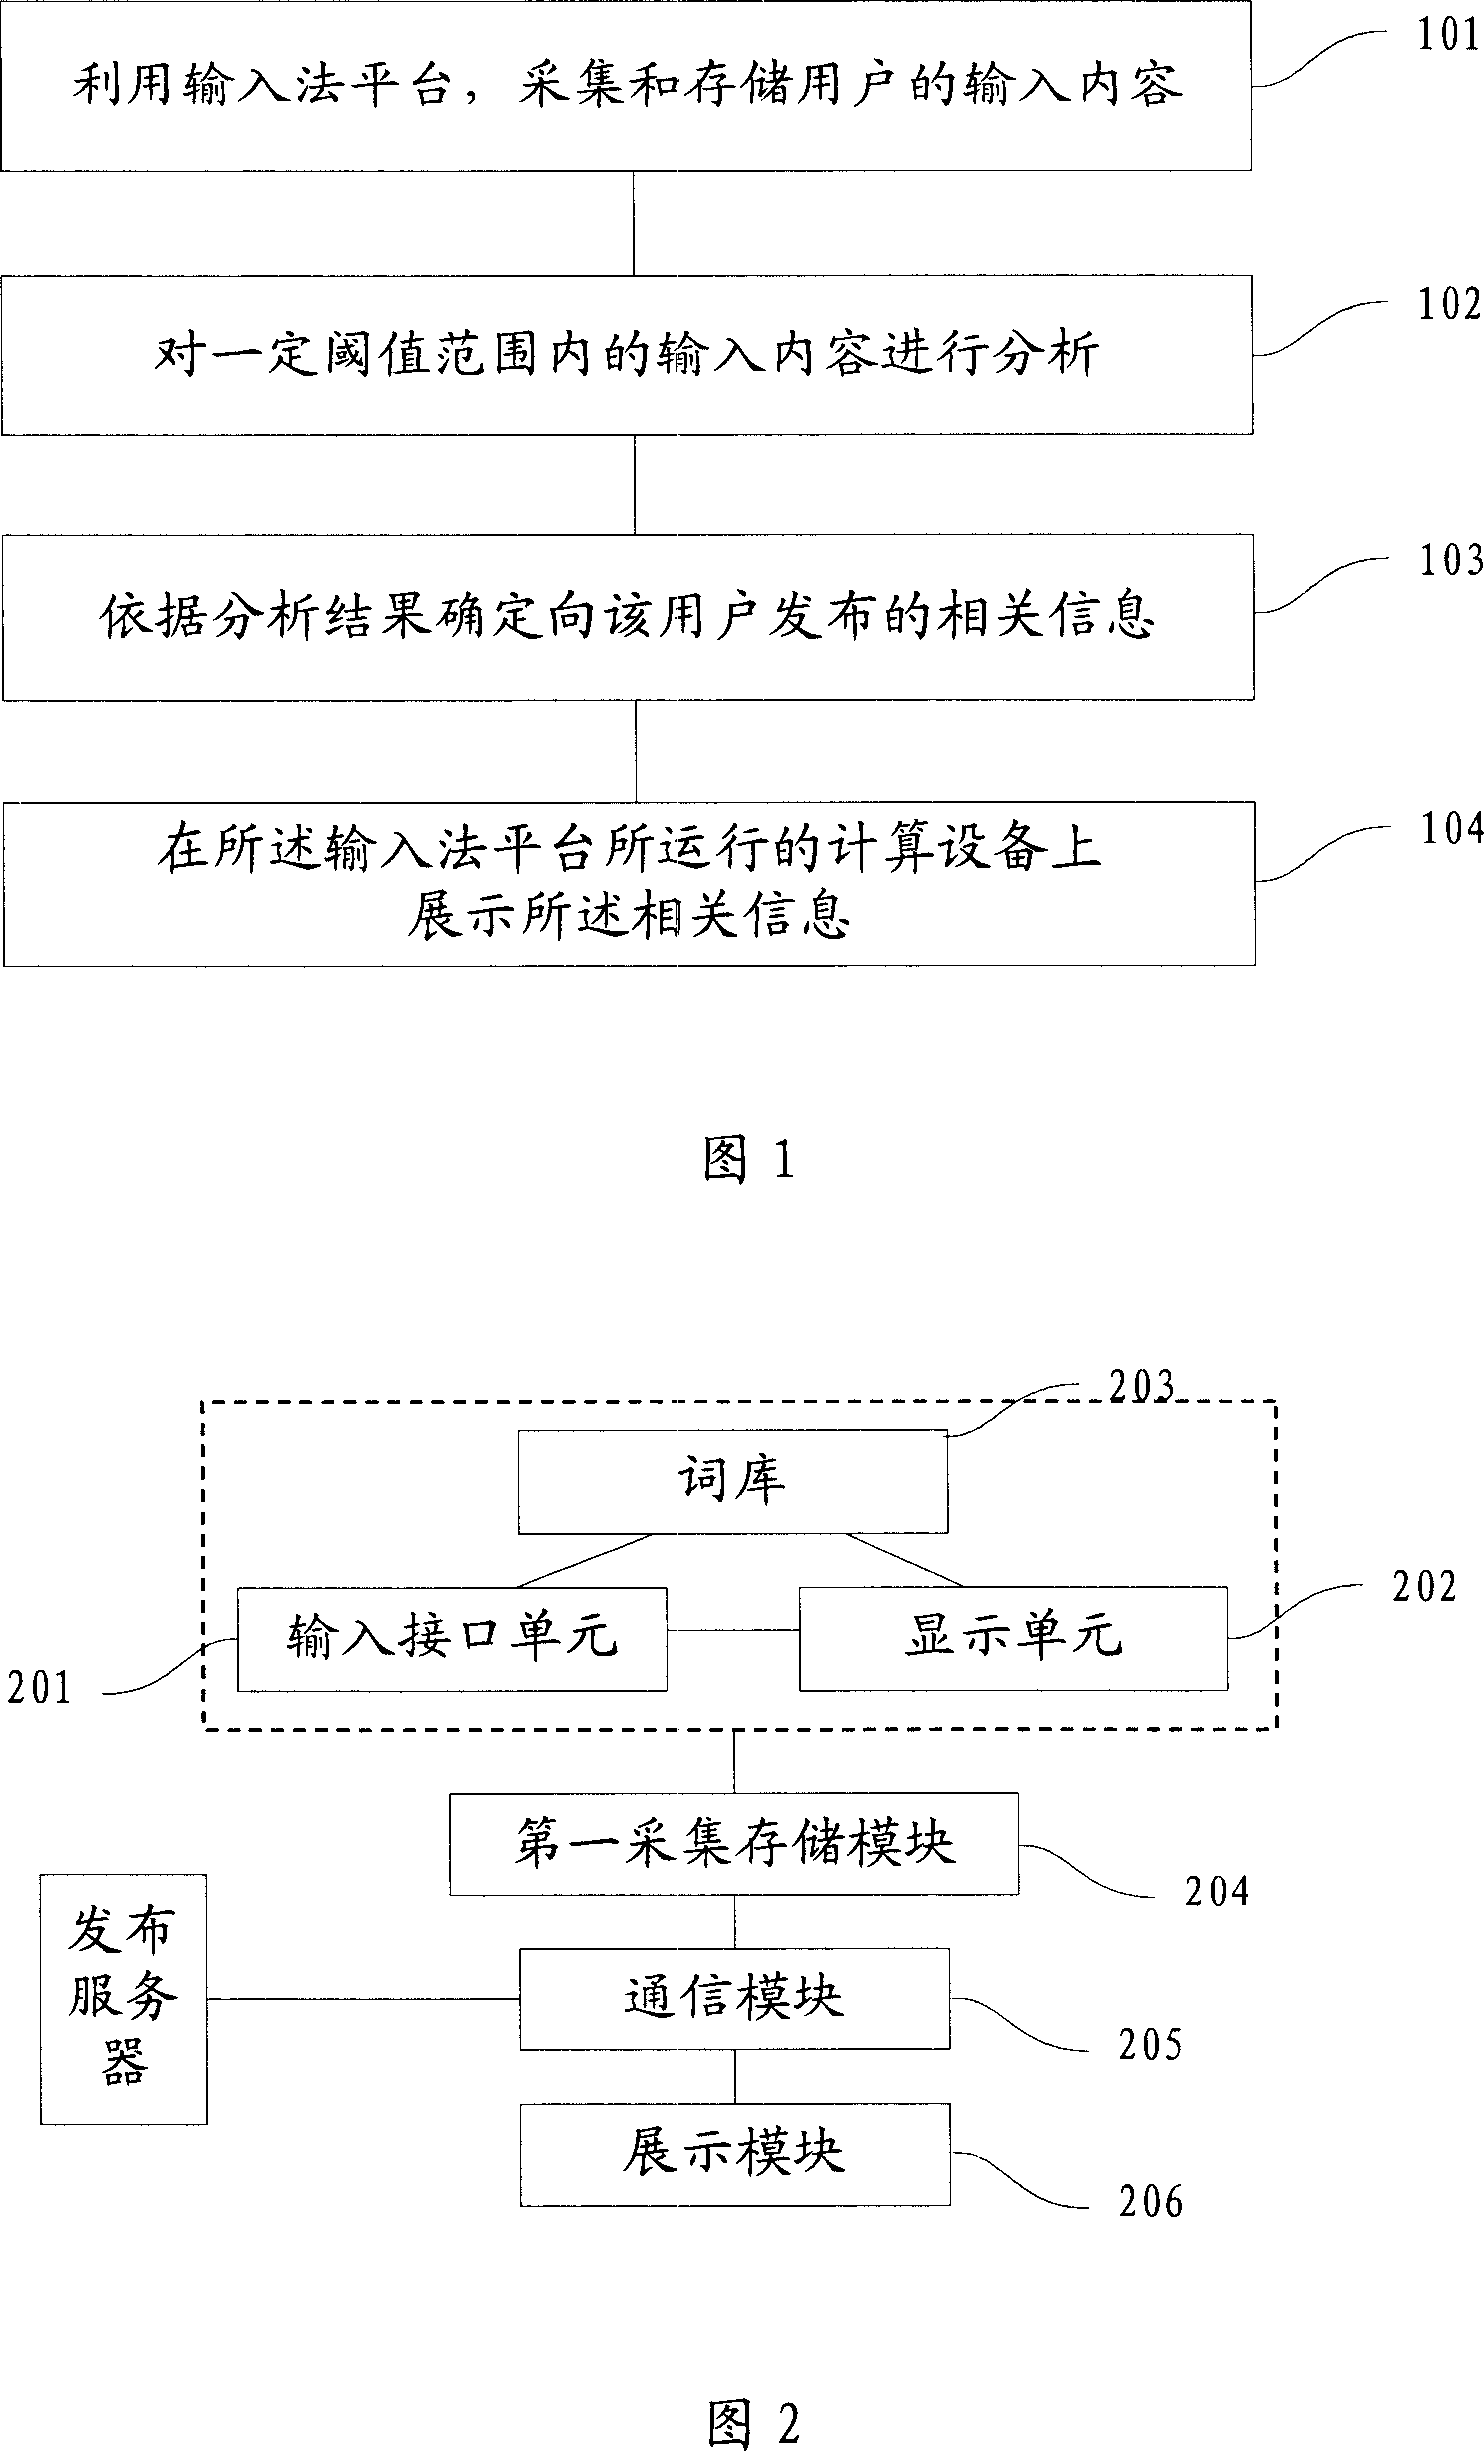 Method and system for distributing information directly associated with user